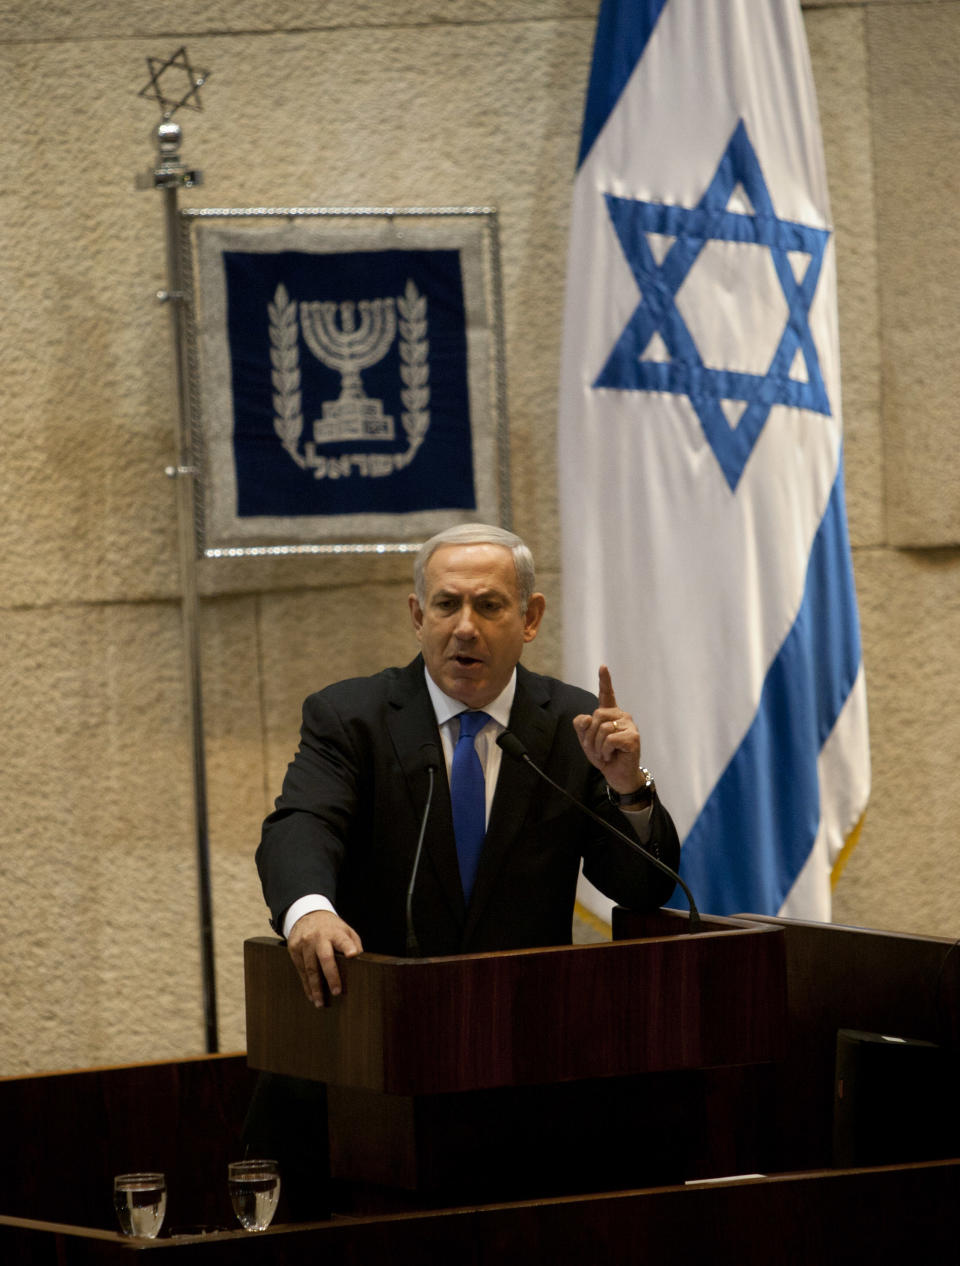 Israeli Prime Minister Benjamin Netanyahu gestures as he delivers a speech at the Knesset, Israel's parliament in Jerusalem, Monday, Oct. 15, 2012. Israel's parliament has gathered for a vote to dissolve itself and hold early parliamentary elections. (AP Photo/Sebastian Scheiner)